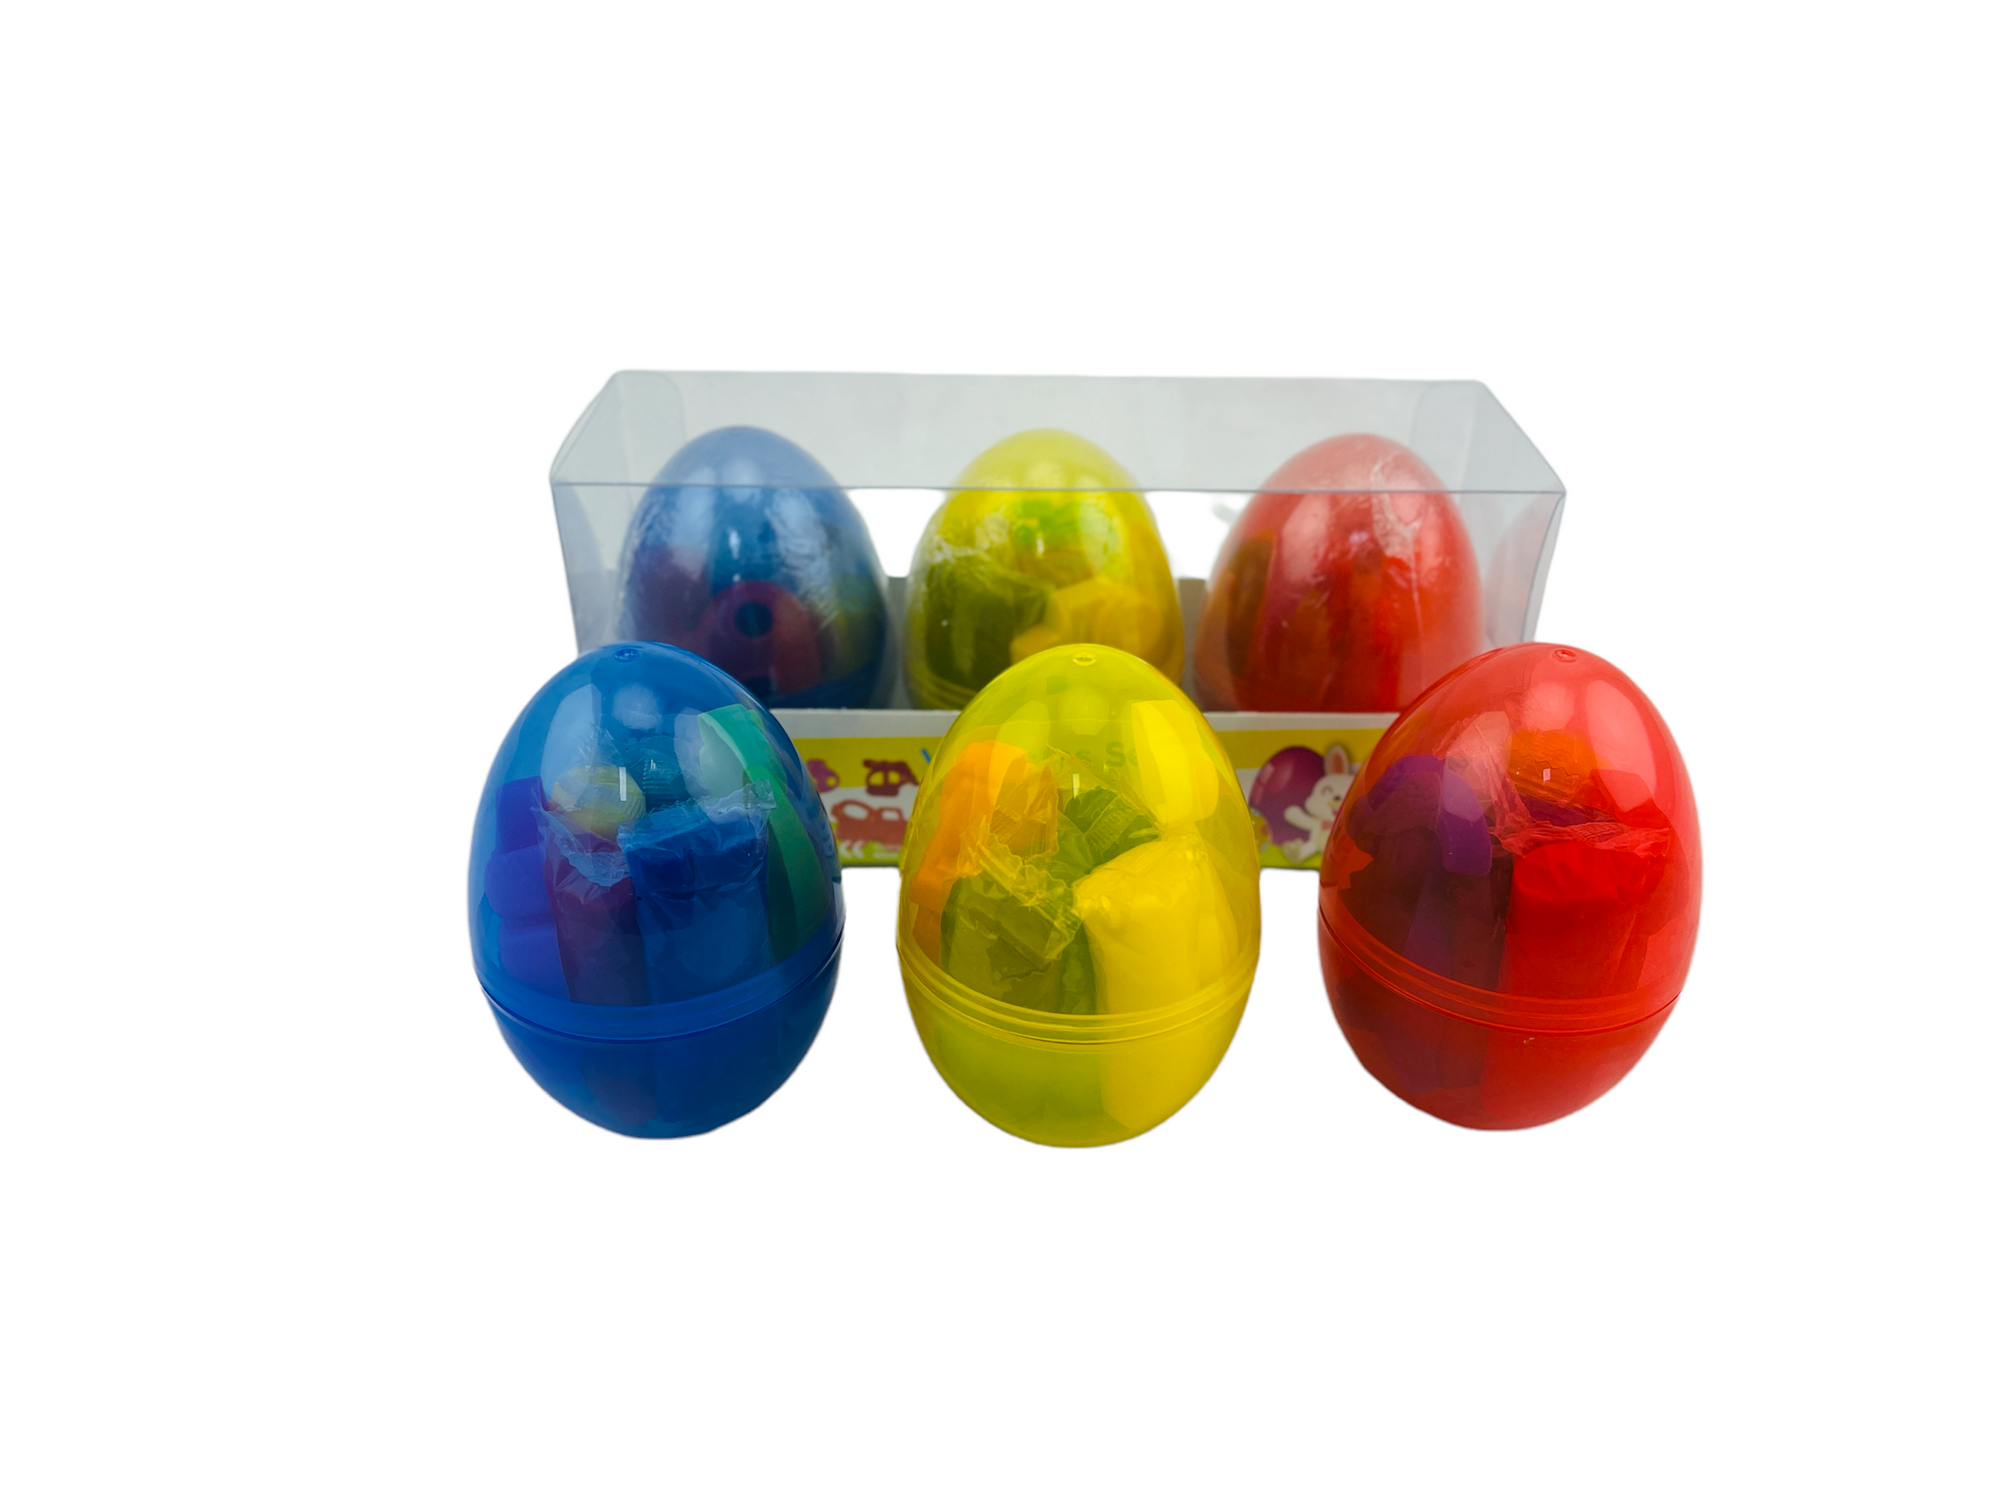 the 3 eggs from the KidArt Dough Set in front of their box